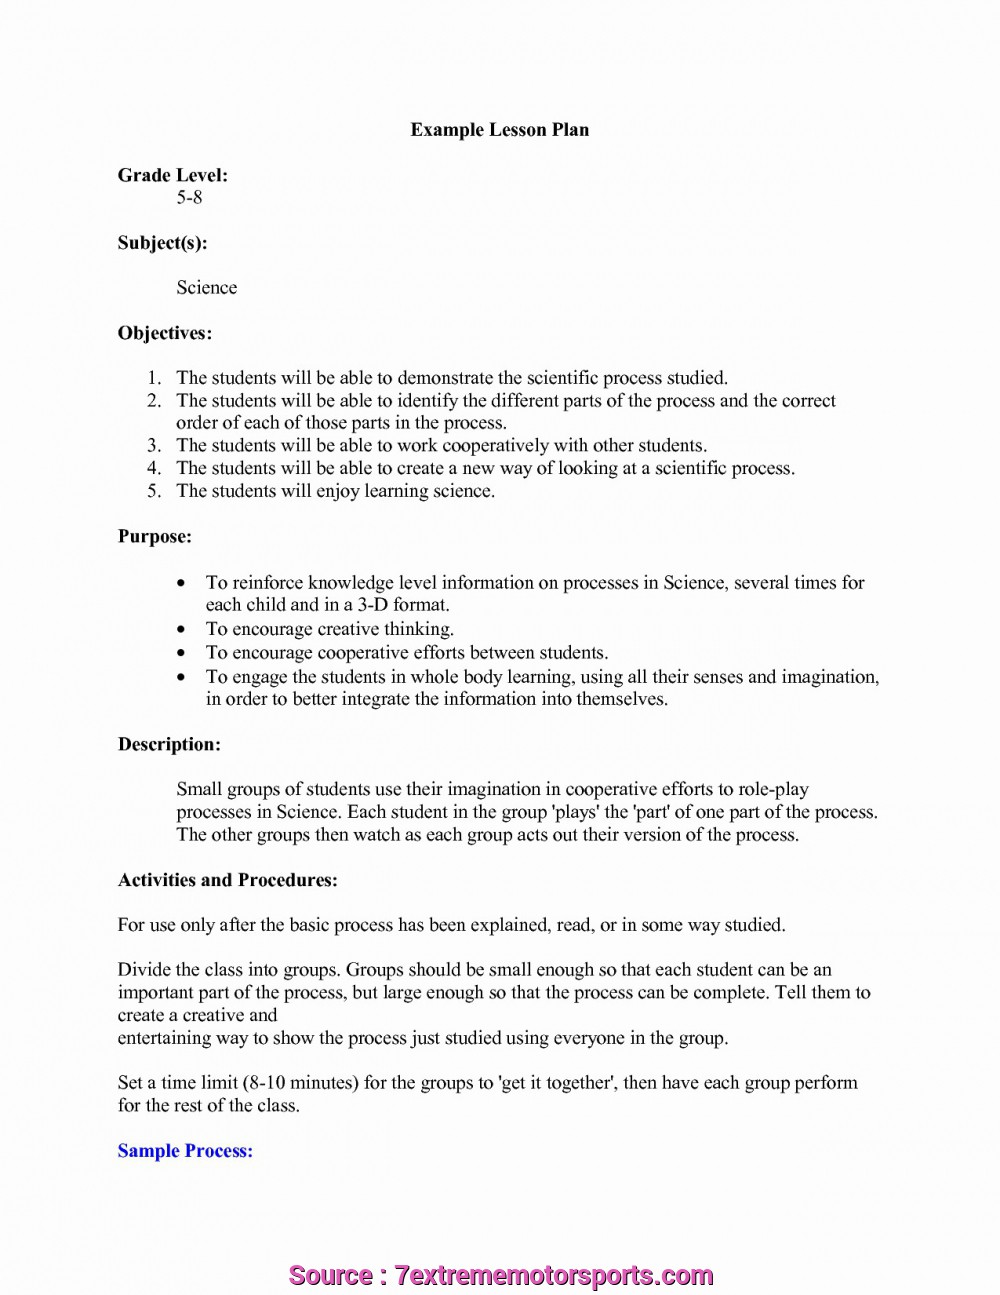 lesson plan template with objectives
 6 Most Lesson Plan Objective Examples Pictures - Ehlschlaeger - lesson plan template with objectives